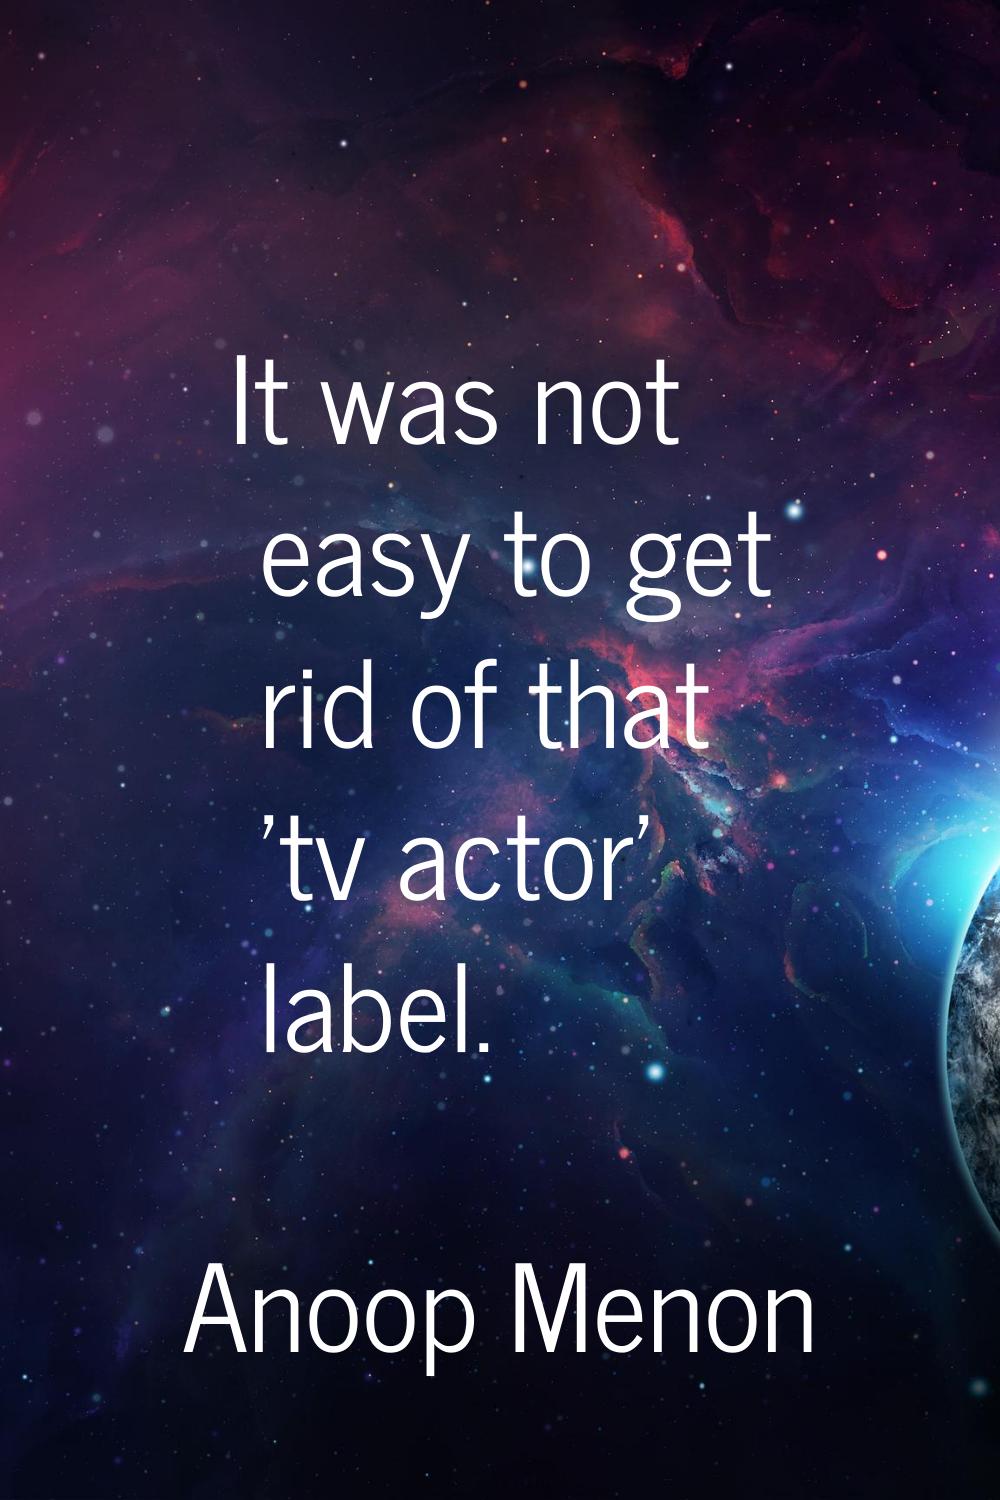 It was not easy to get rid of that 'tv actor' label.